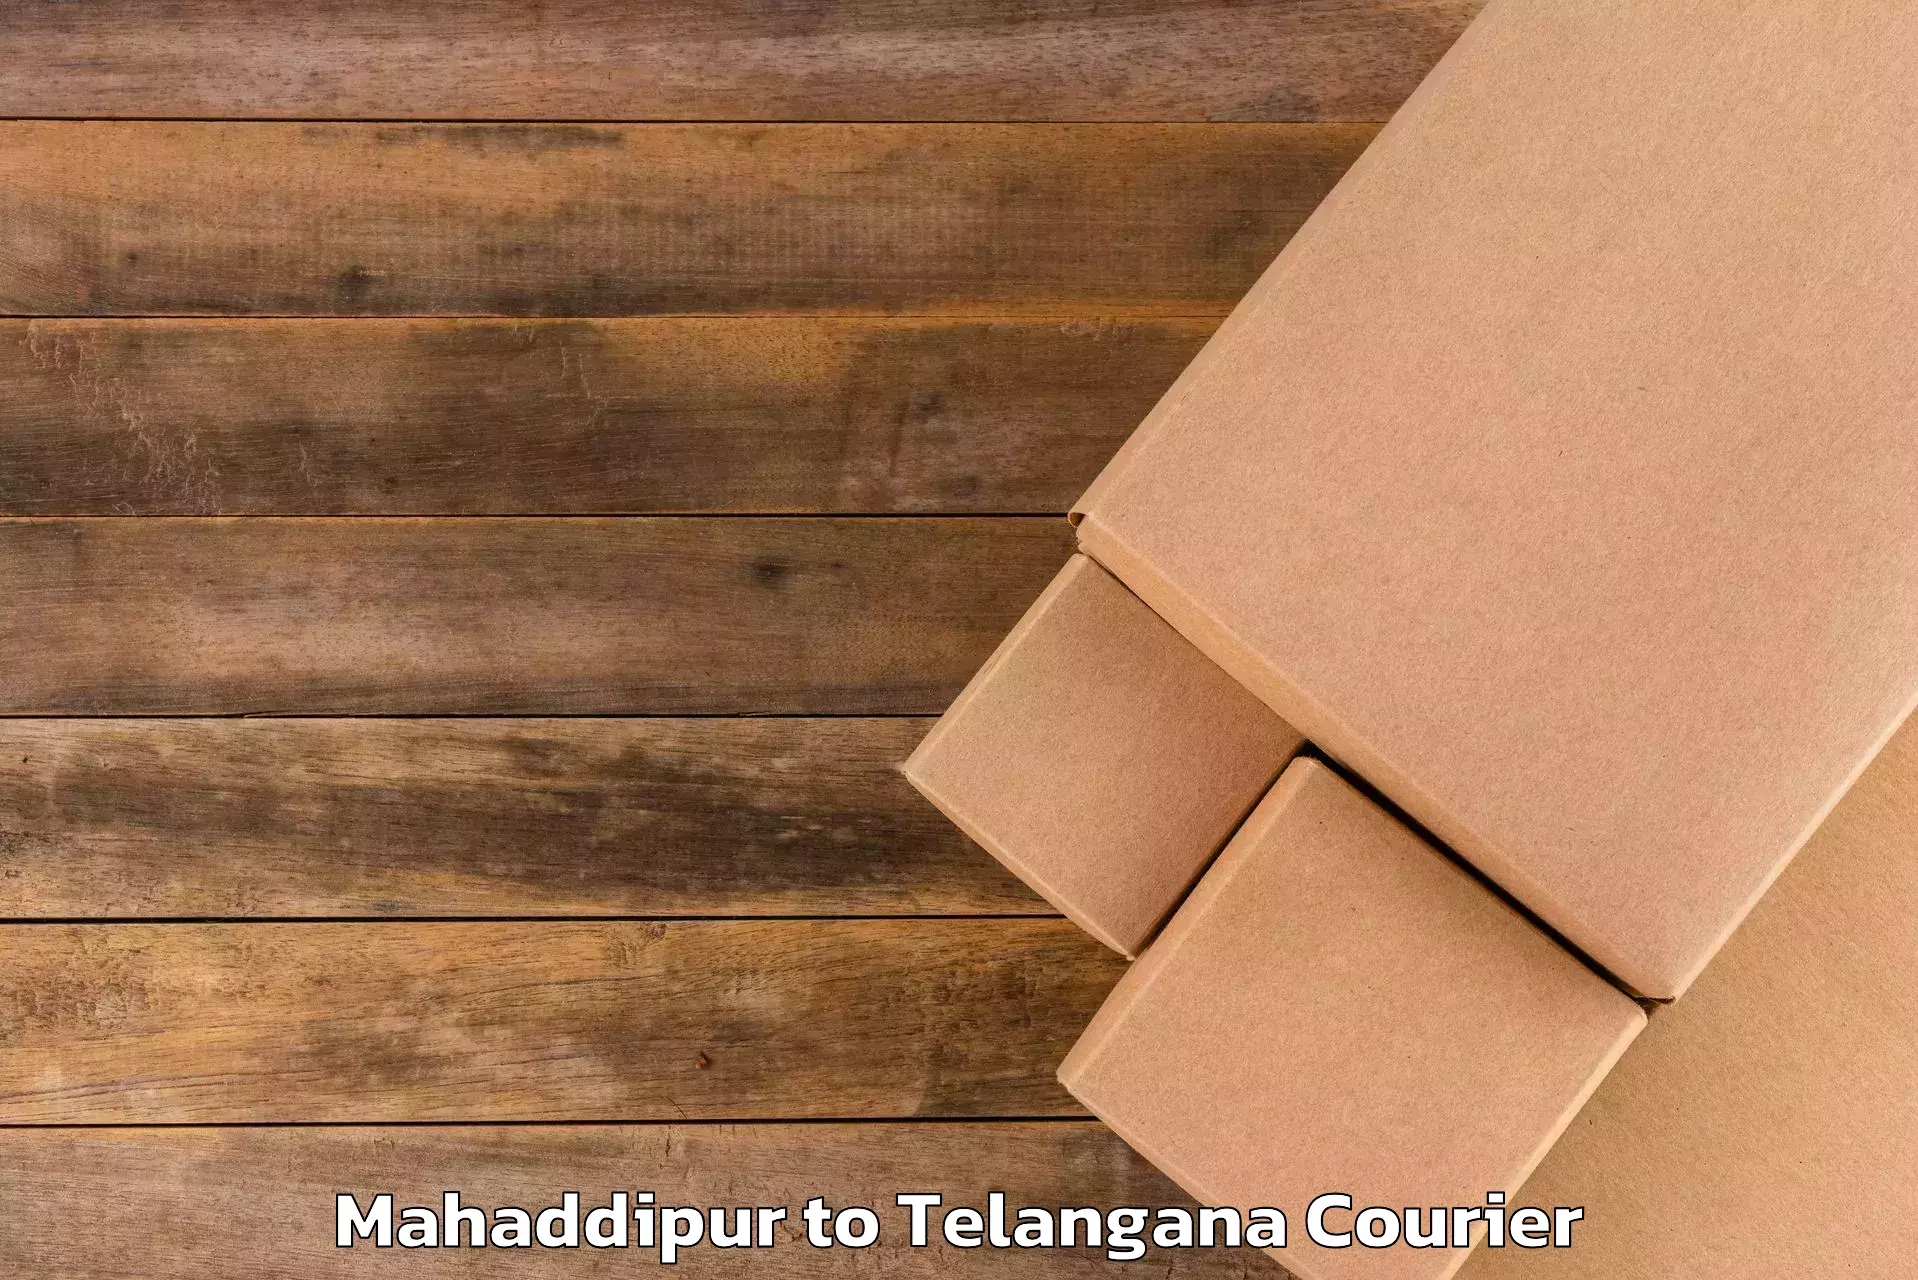 Online luggage shipping in Mahaddipur to Eligedu